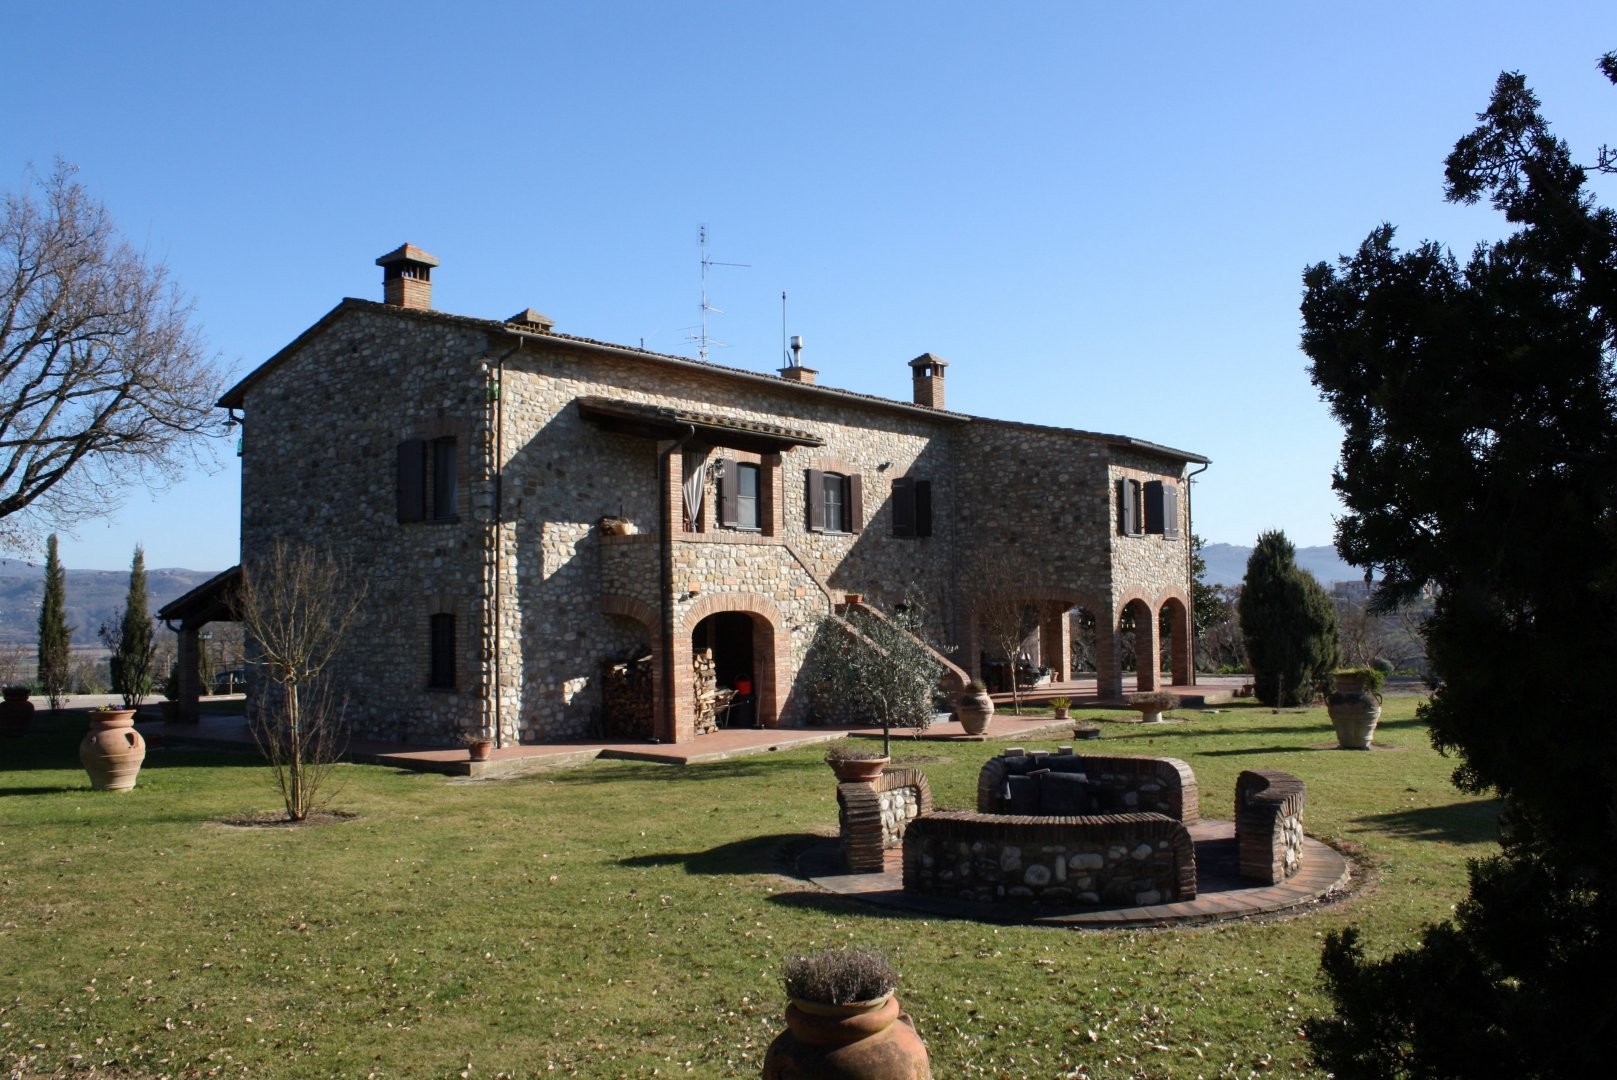 5 bedroom Farmhouse for sale with countryside and panoramic views in Fabro, Umbria